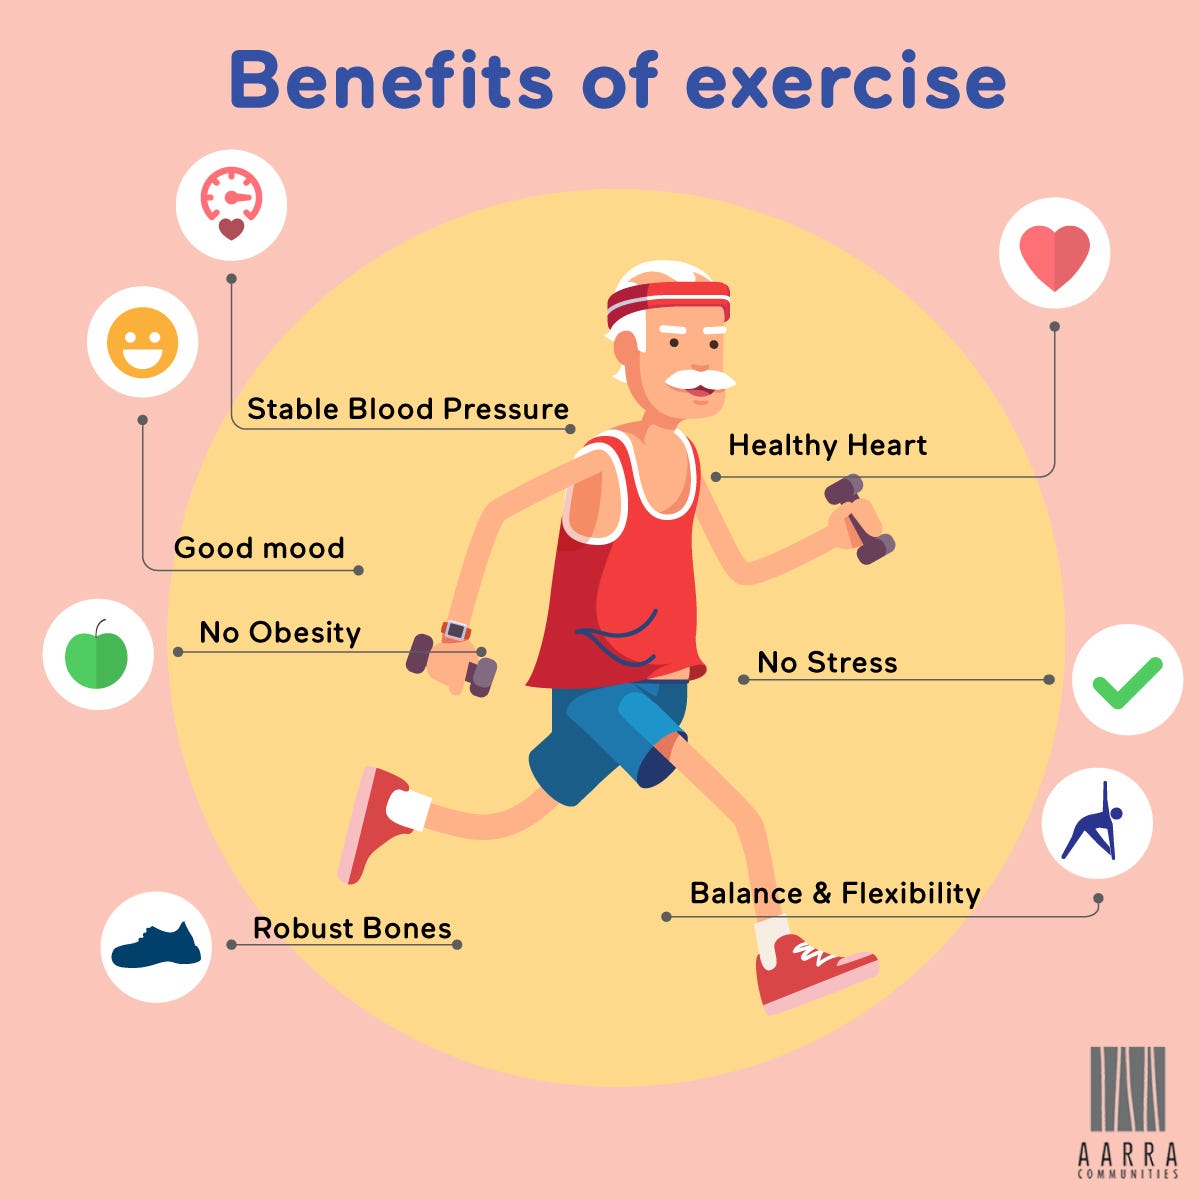 What people do sports for. Benefits of exercise. Exercises по теме Health. Упражнения по теме Health. Health benefits of exercise.